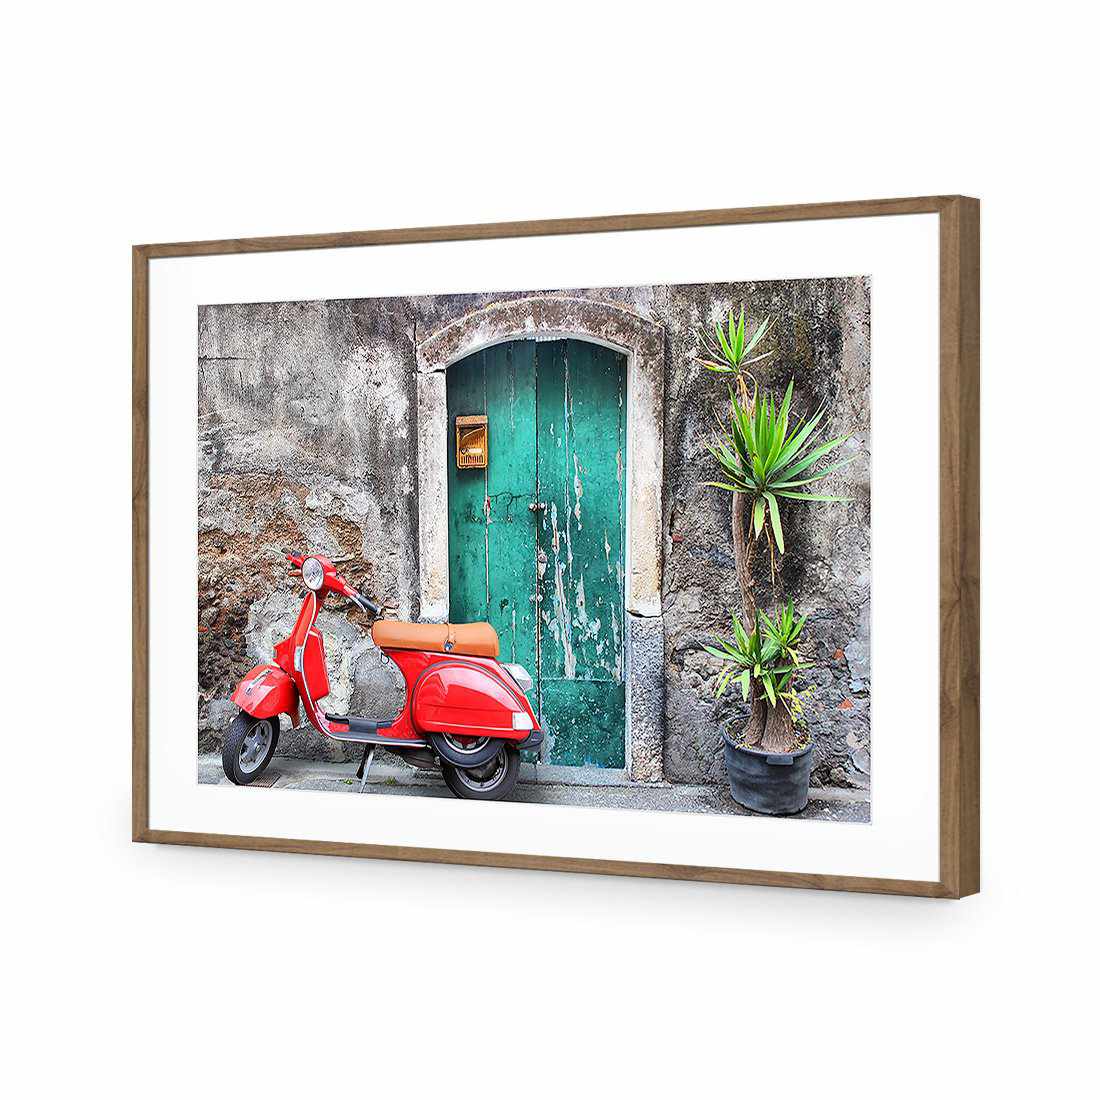 Vintage Door And Scooter-Acrylic-Wall Art Design-With Border-Acrylic - Natural Frame-45x30cm-Wall Art Designs